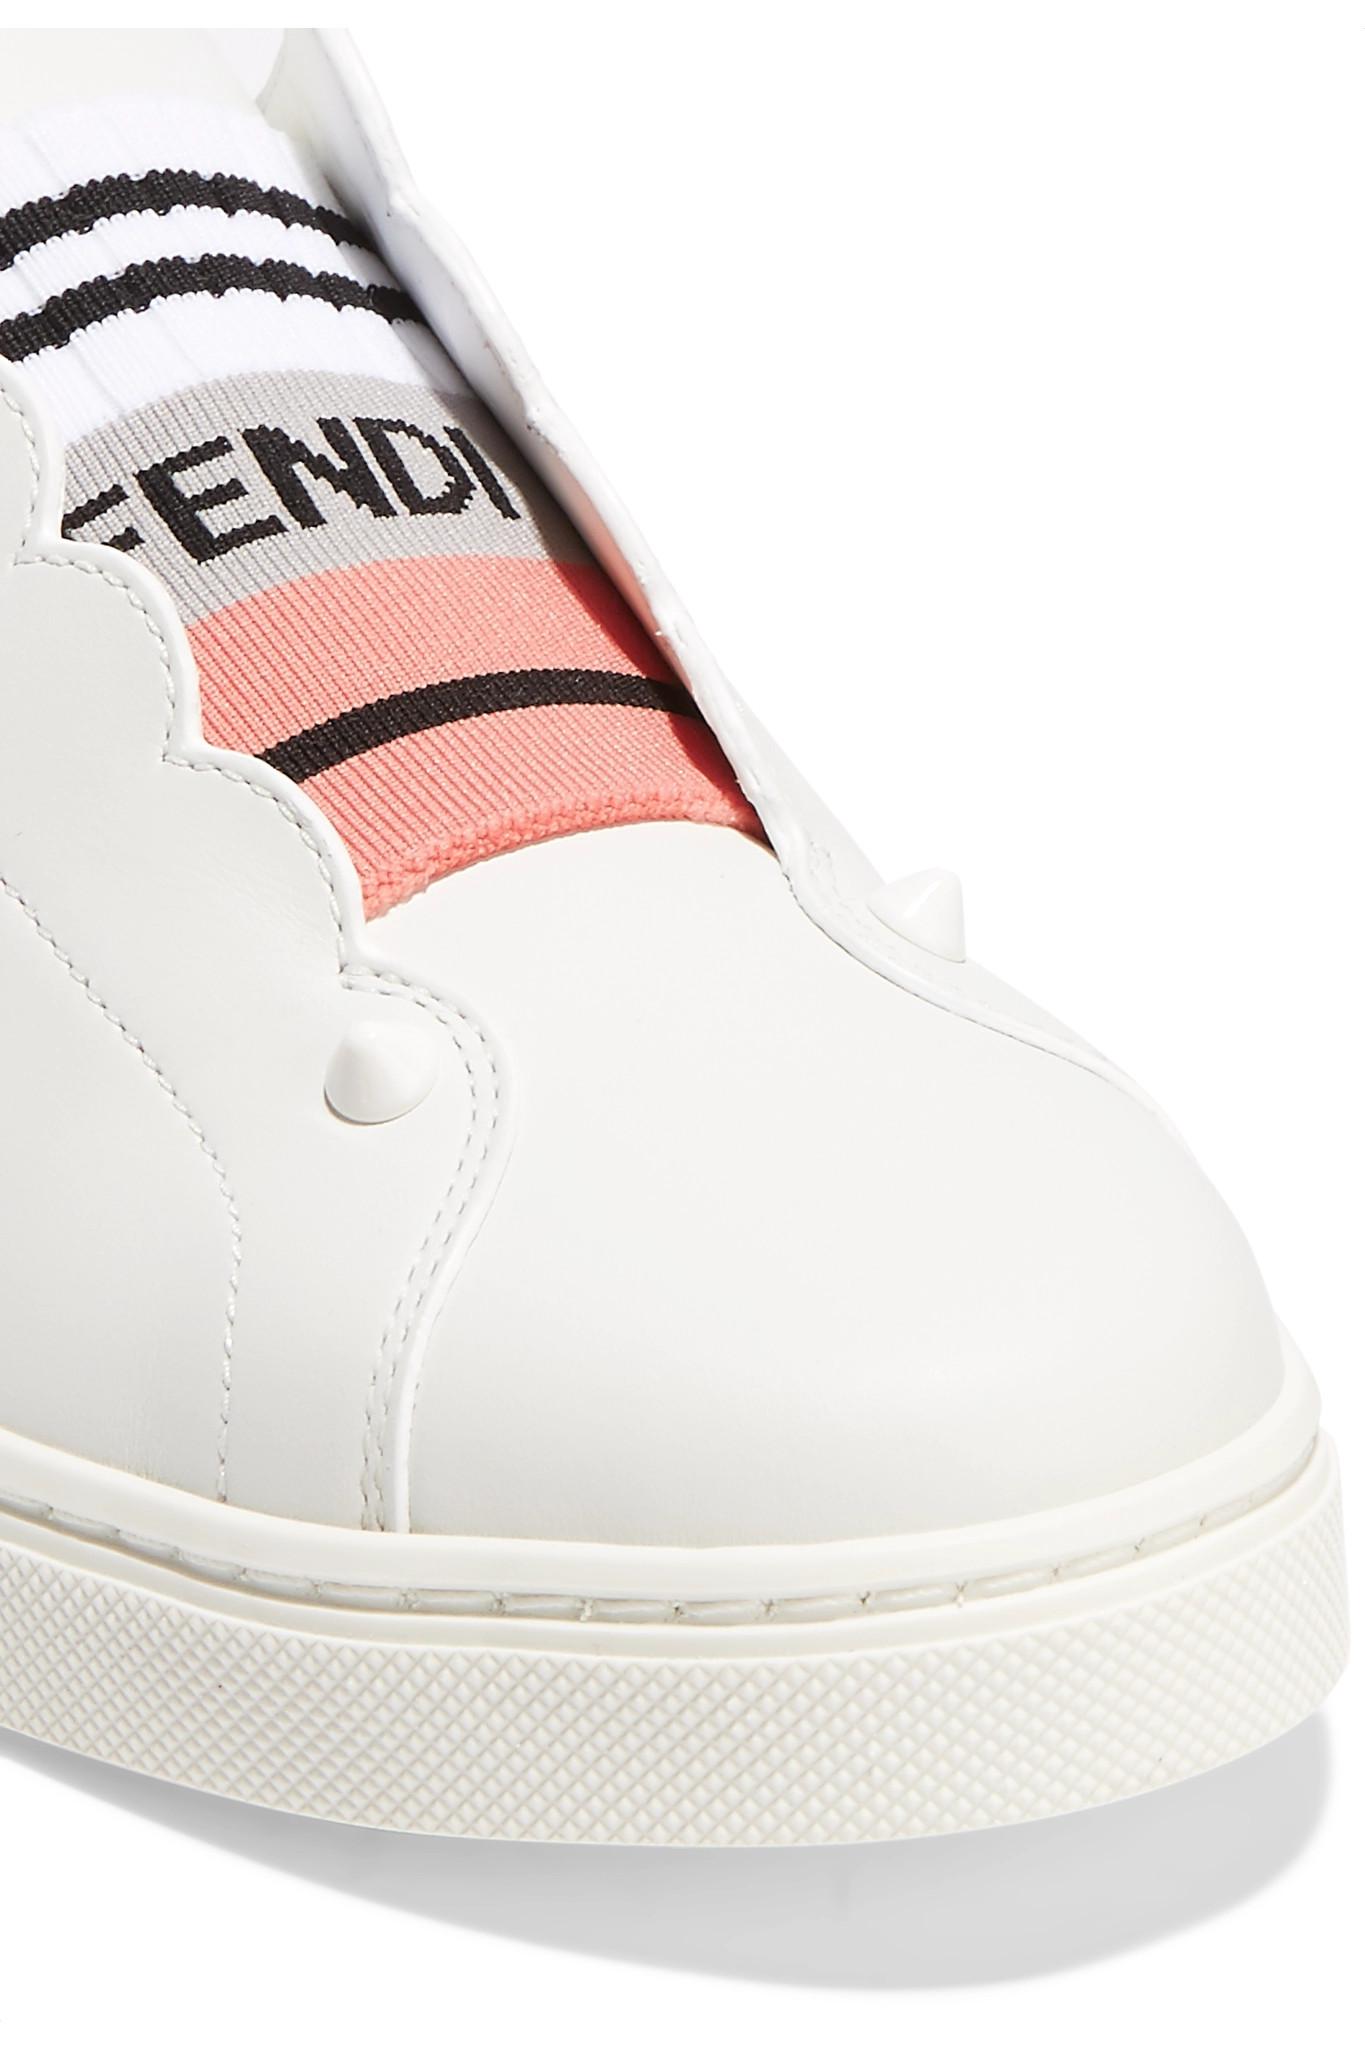 Fendi Scalloped Leather Slip-on Sneakers in White | Lyst